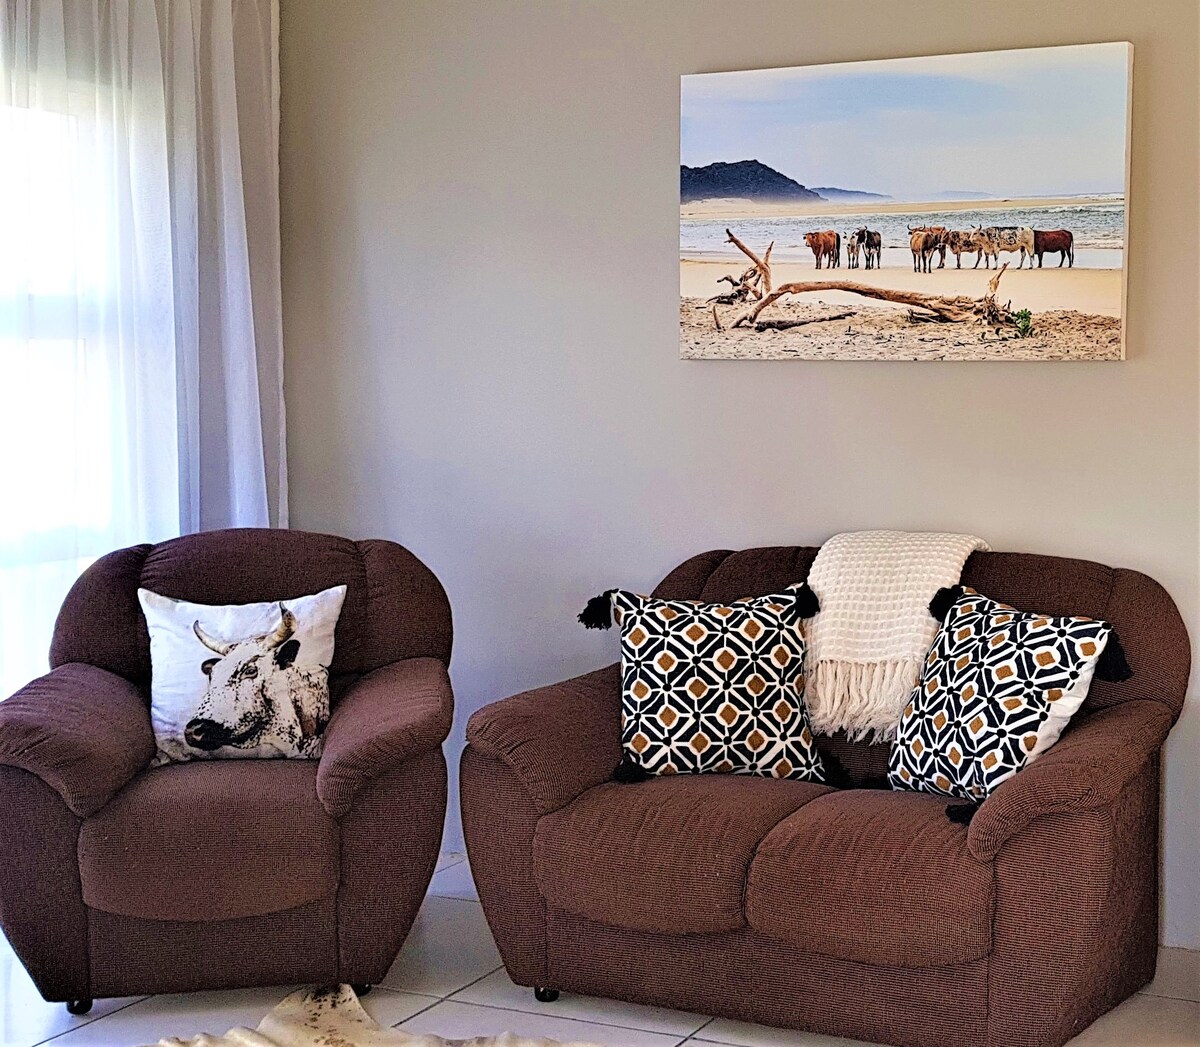 Nguni House - 4 bedroom pet friendly holiday home.